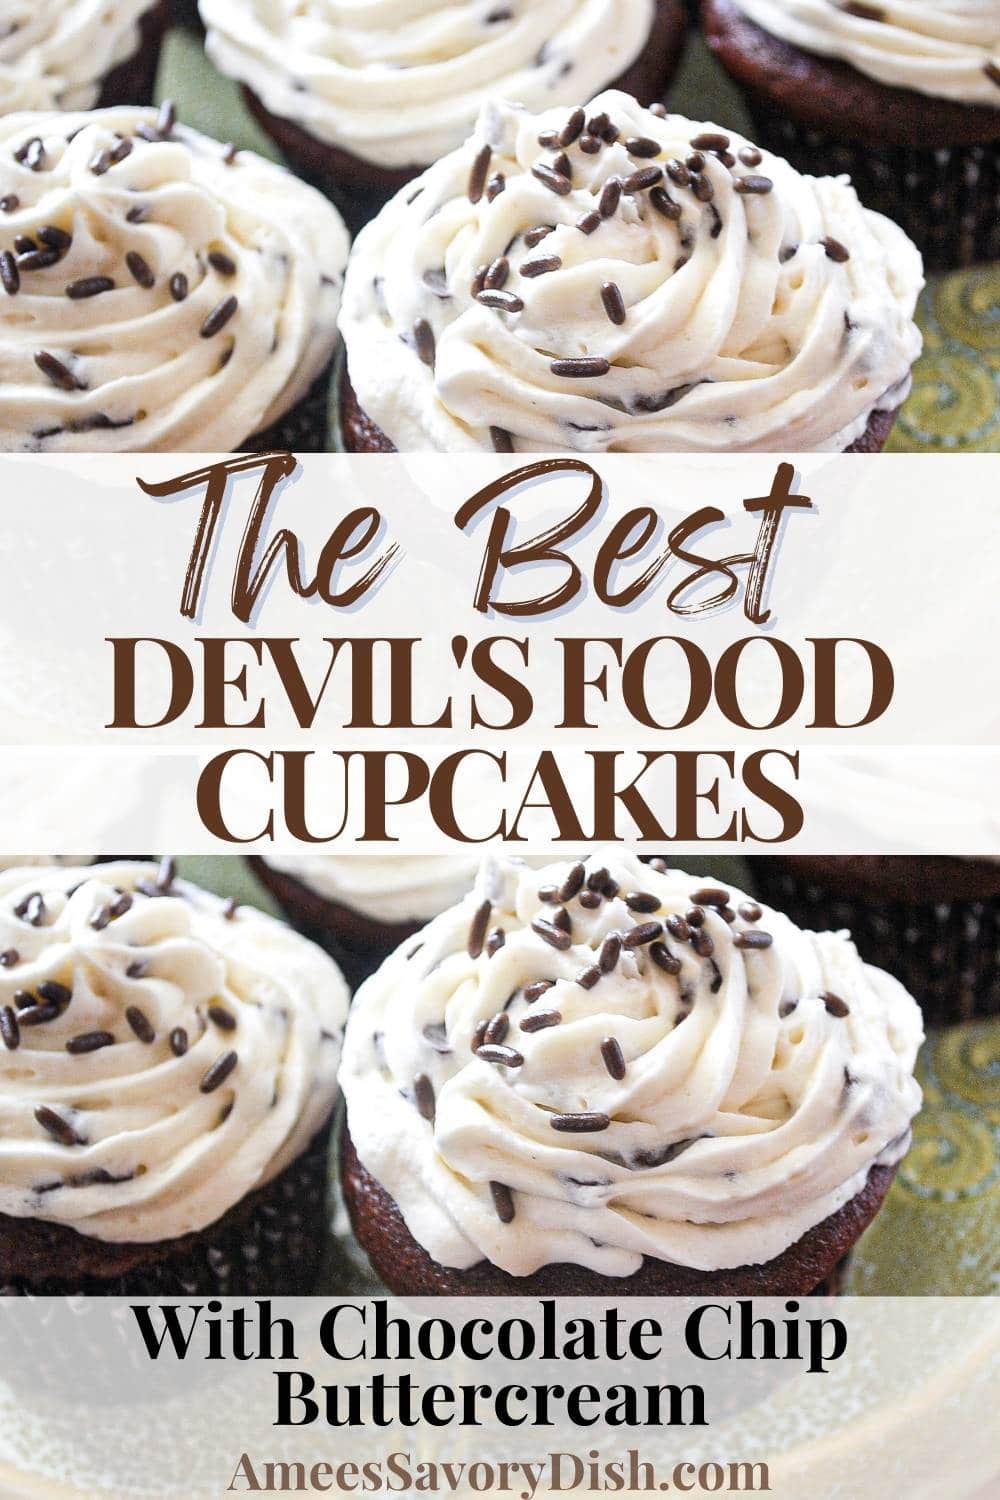 A simple recipe from scratch for super Moist Devil's Food Cupcakes with a rich and delicious buttercream chocolate chip frosting. #devilsfood #cupcakes #chocolatecupcakes #chocolatechipfrosting #buttercreamfrosting via @Ameessavorydish